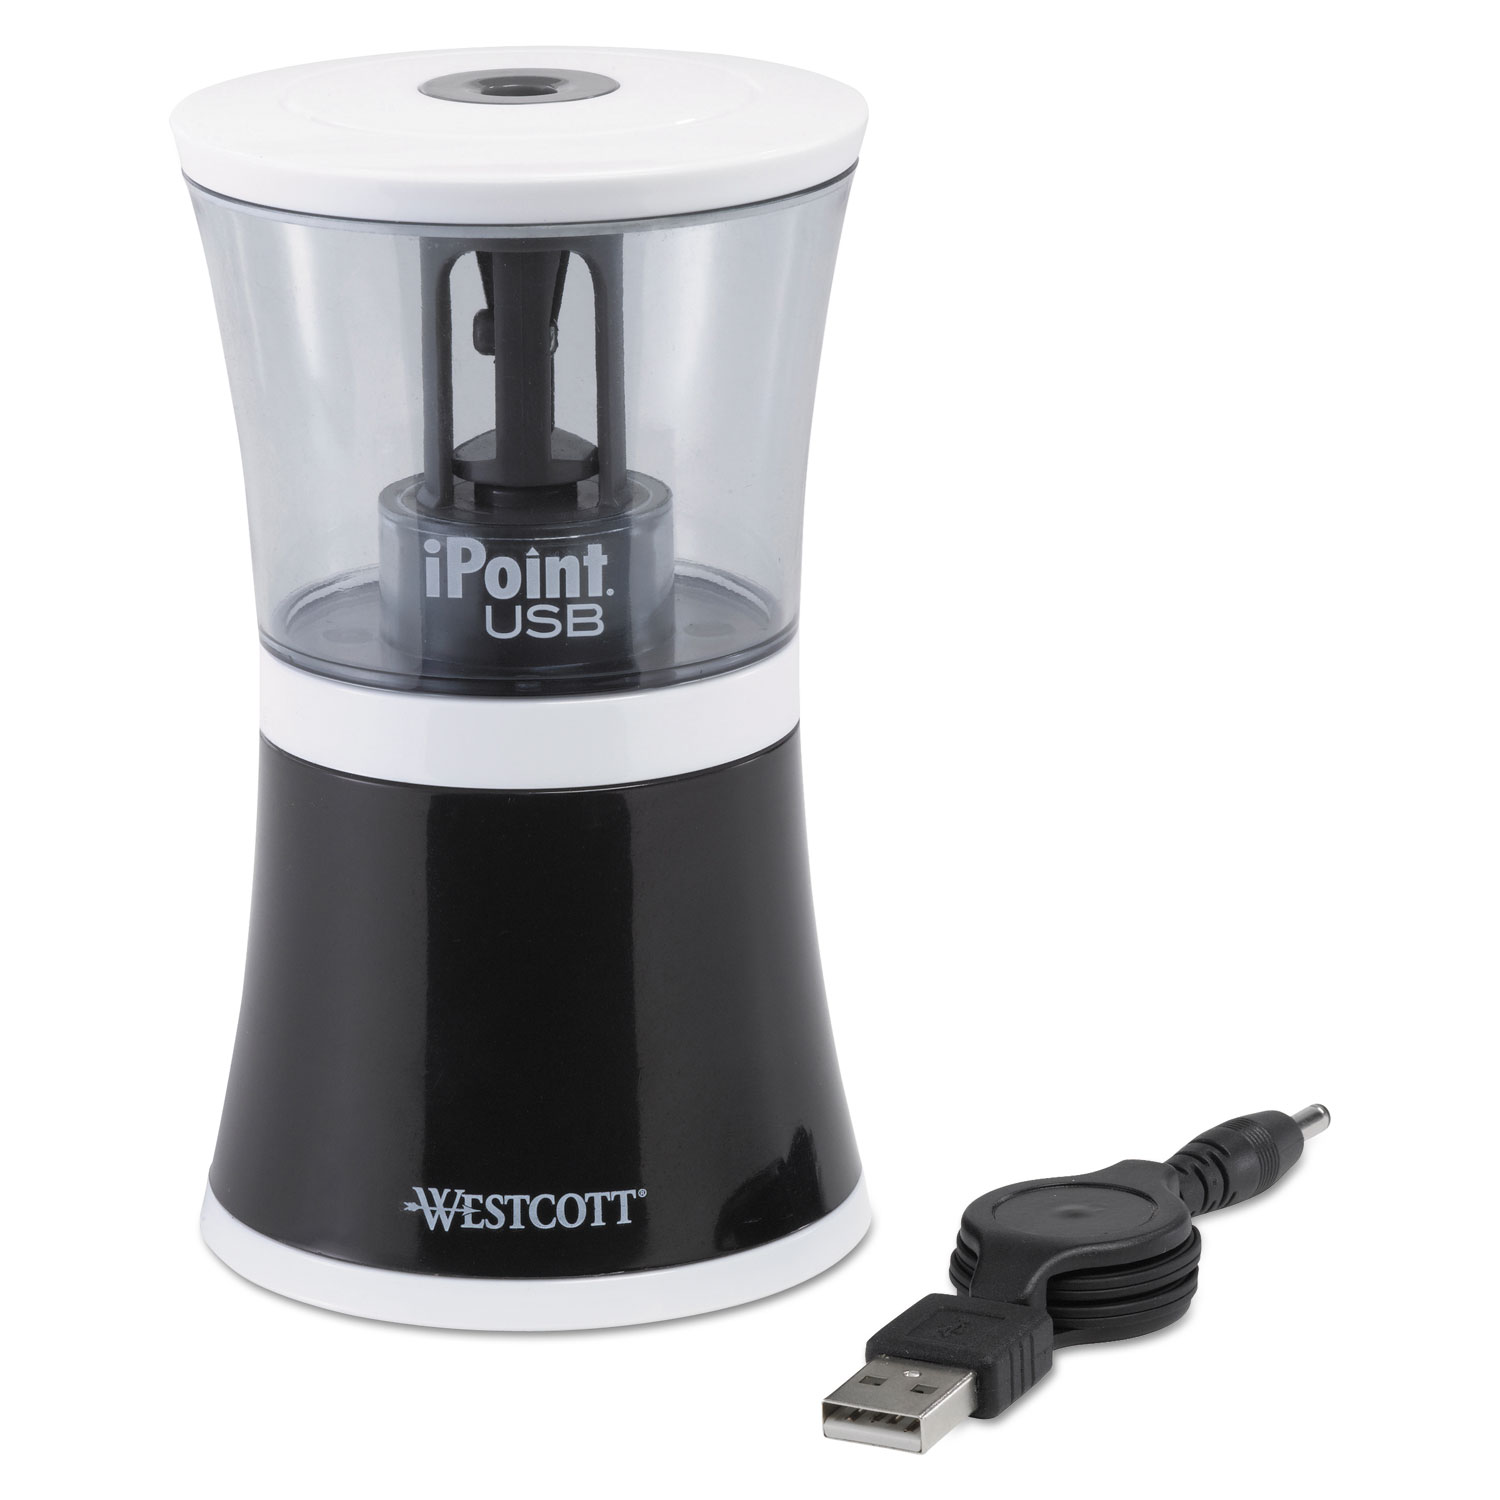 iPoint USB/Battery Operated Pencil Sharpener, Black, 5 7/8w x 3 1/8d x 8 1/2h